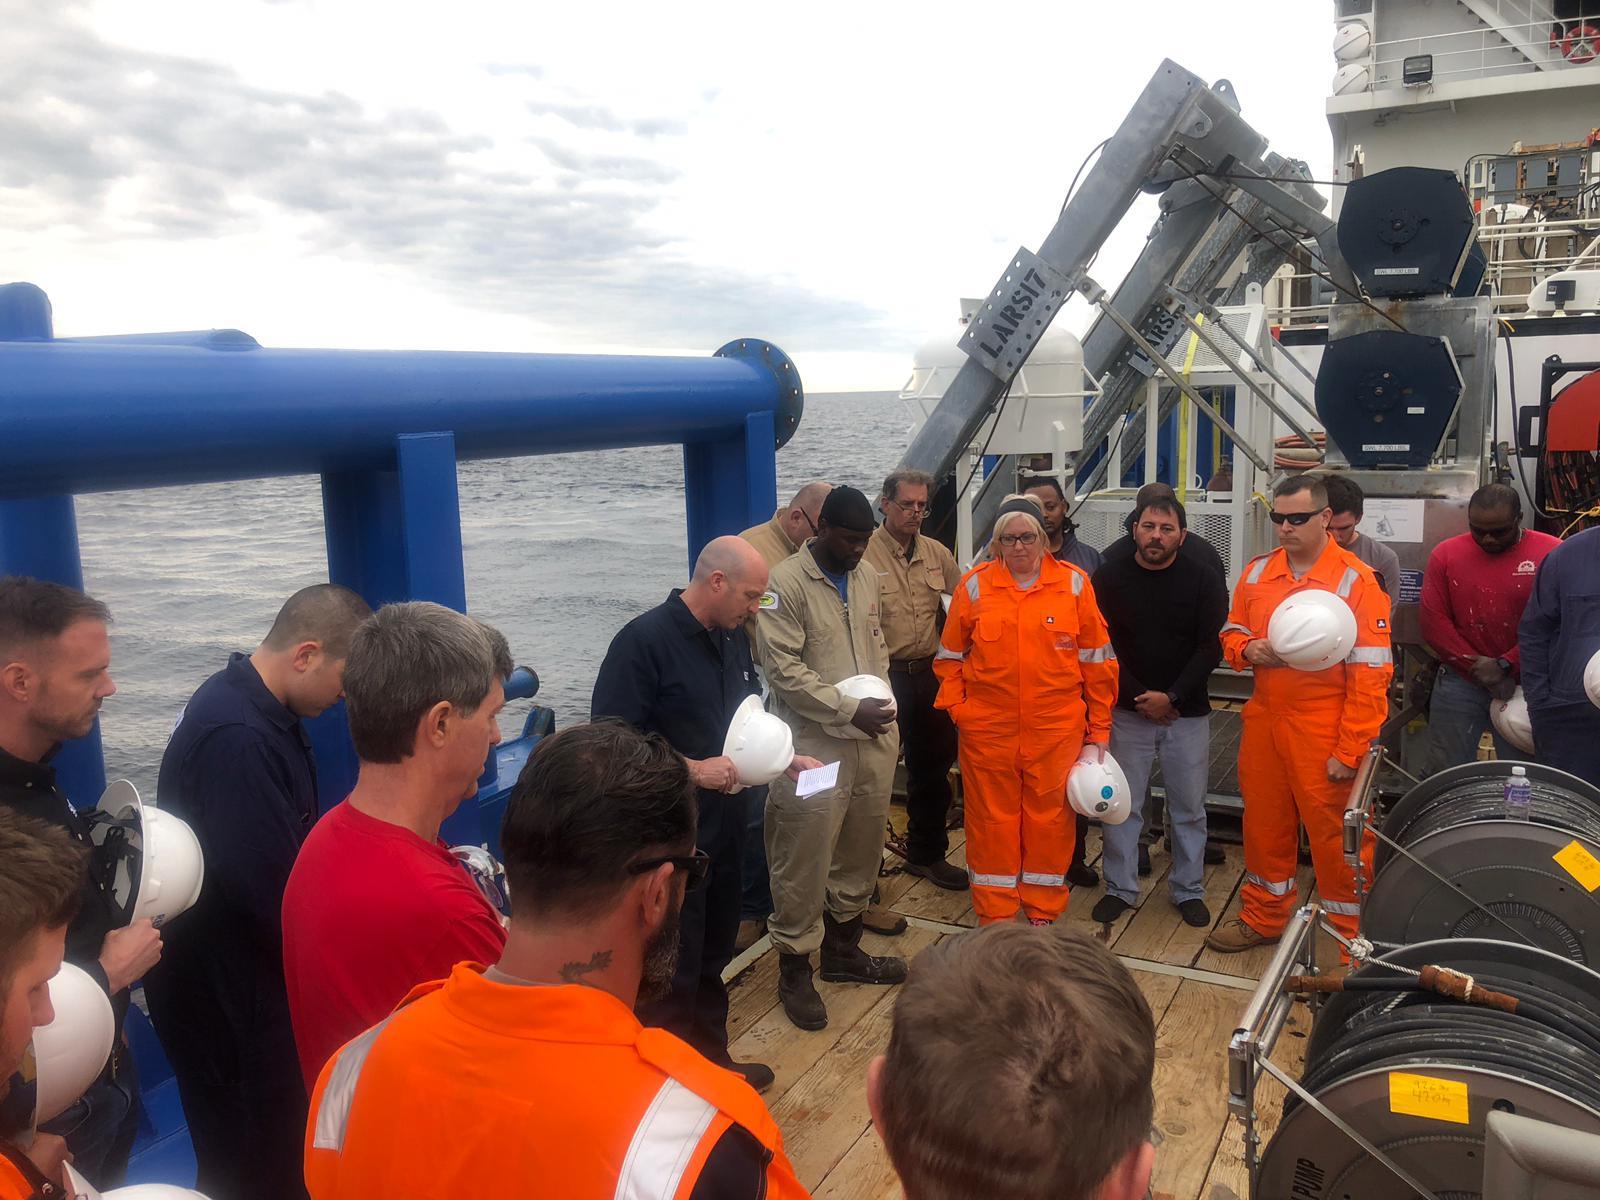 Coast Guard crewmembers work alongside New York State Department of Environmental Conservation and Resolve Marine Group to help assess the condition of the Coimbra wreck on April 30, 2019. The Coimbra was a supply ship owned by Great Britain when the ship was sunk off the coast of Long Island, during World War II by a German U-boat. (U.S. Coast Guard photo courtesy of Sector Long Island Sound)